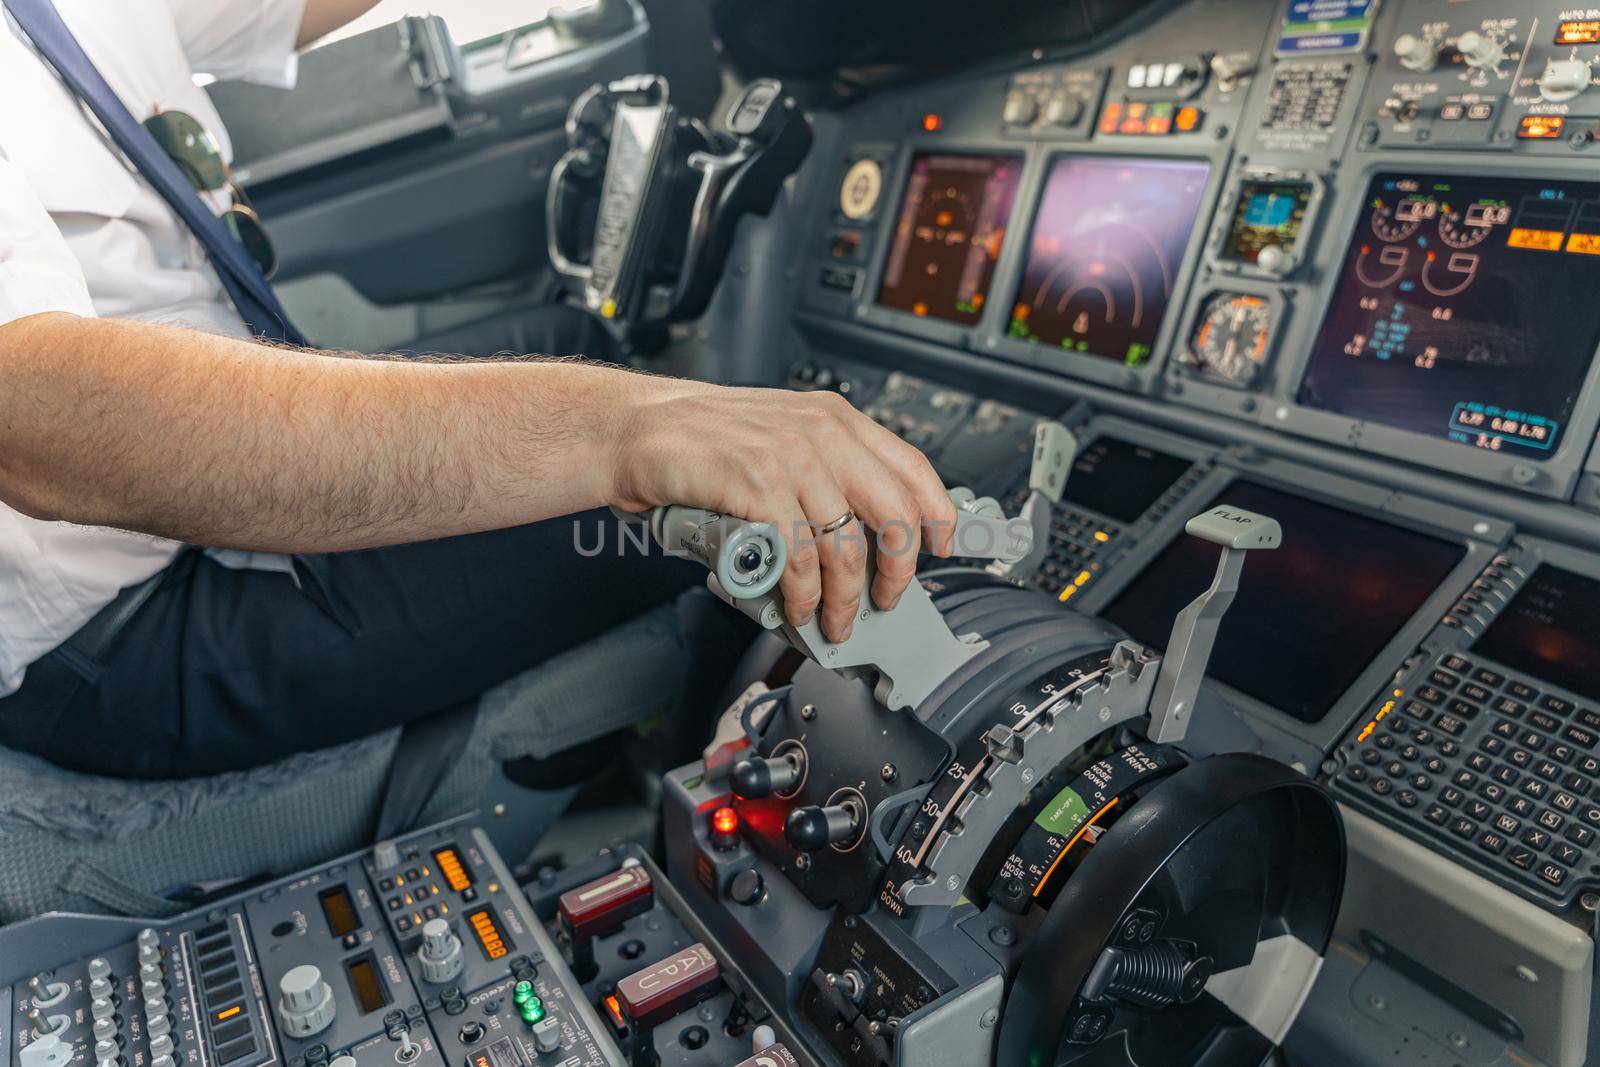 Pilot is piloting airplane from airplane cockpit by Yaroslav_astakhov